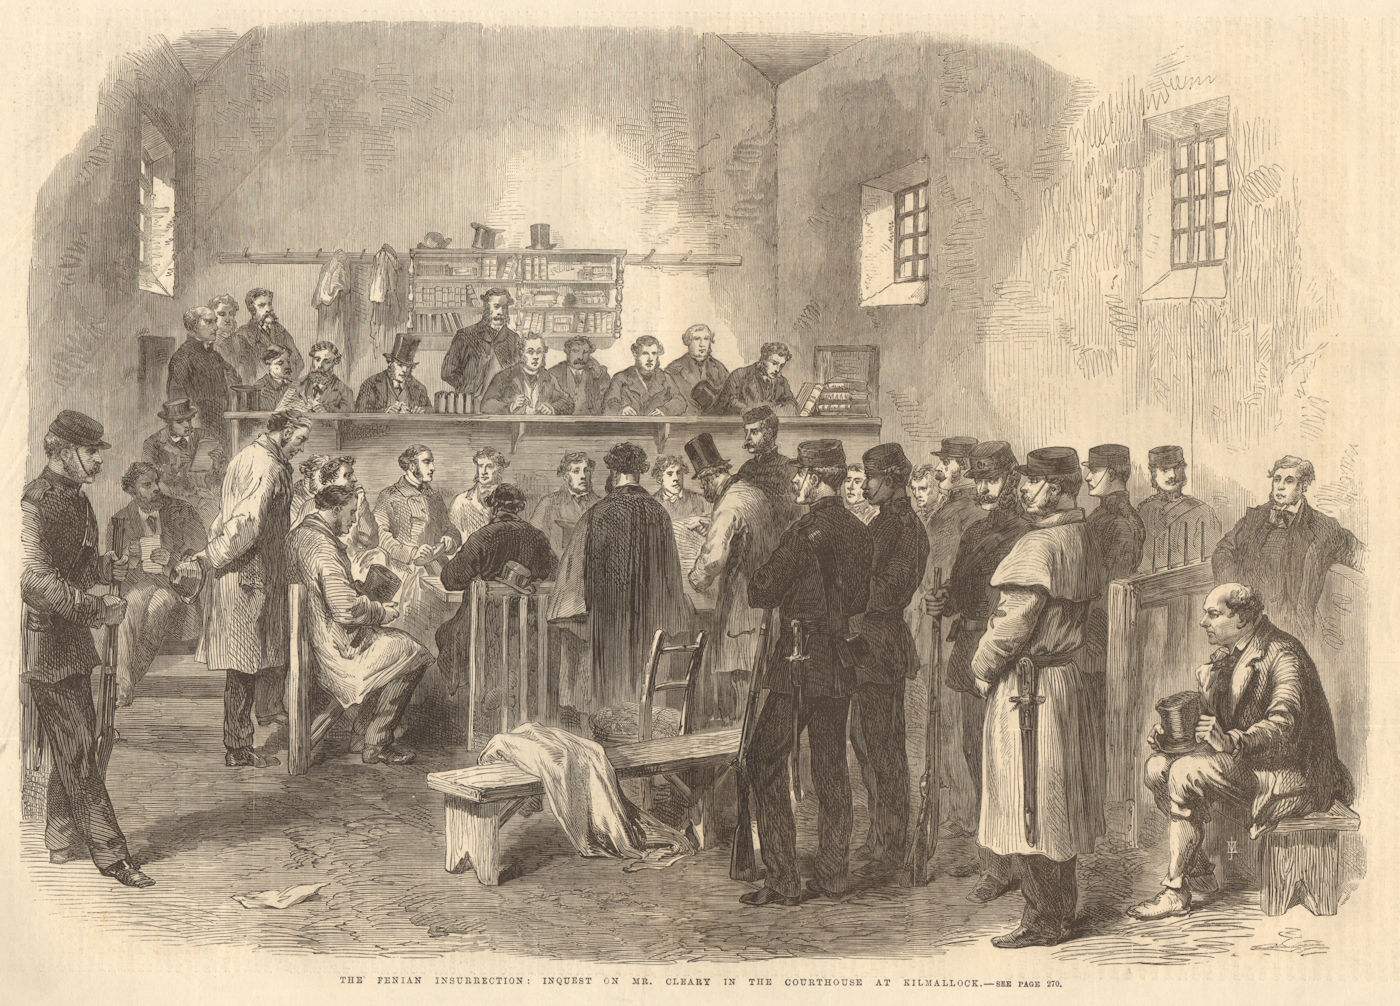 The Fenian insurrection: inquest on Mr. Cleary at Kilmallock courthouse 1867